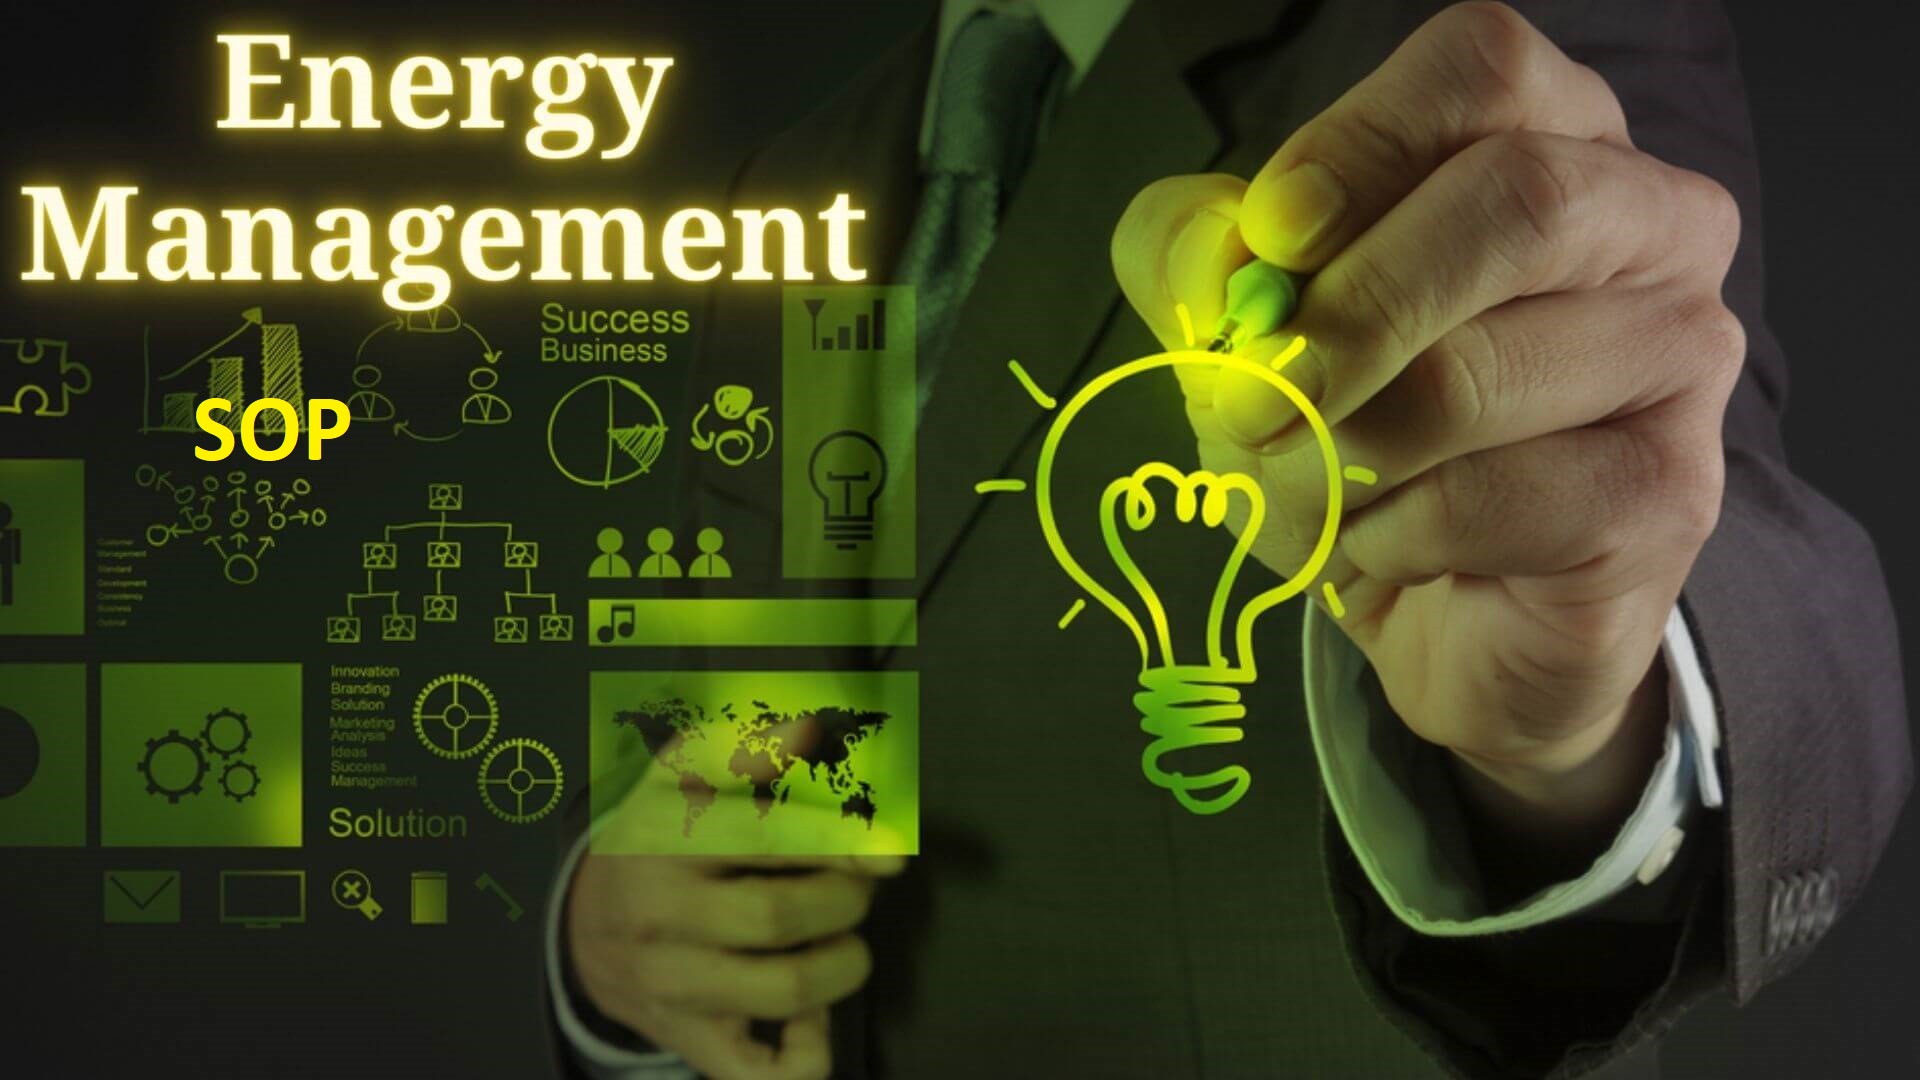 SOP for MS Energy Management